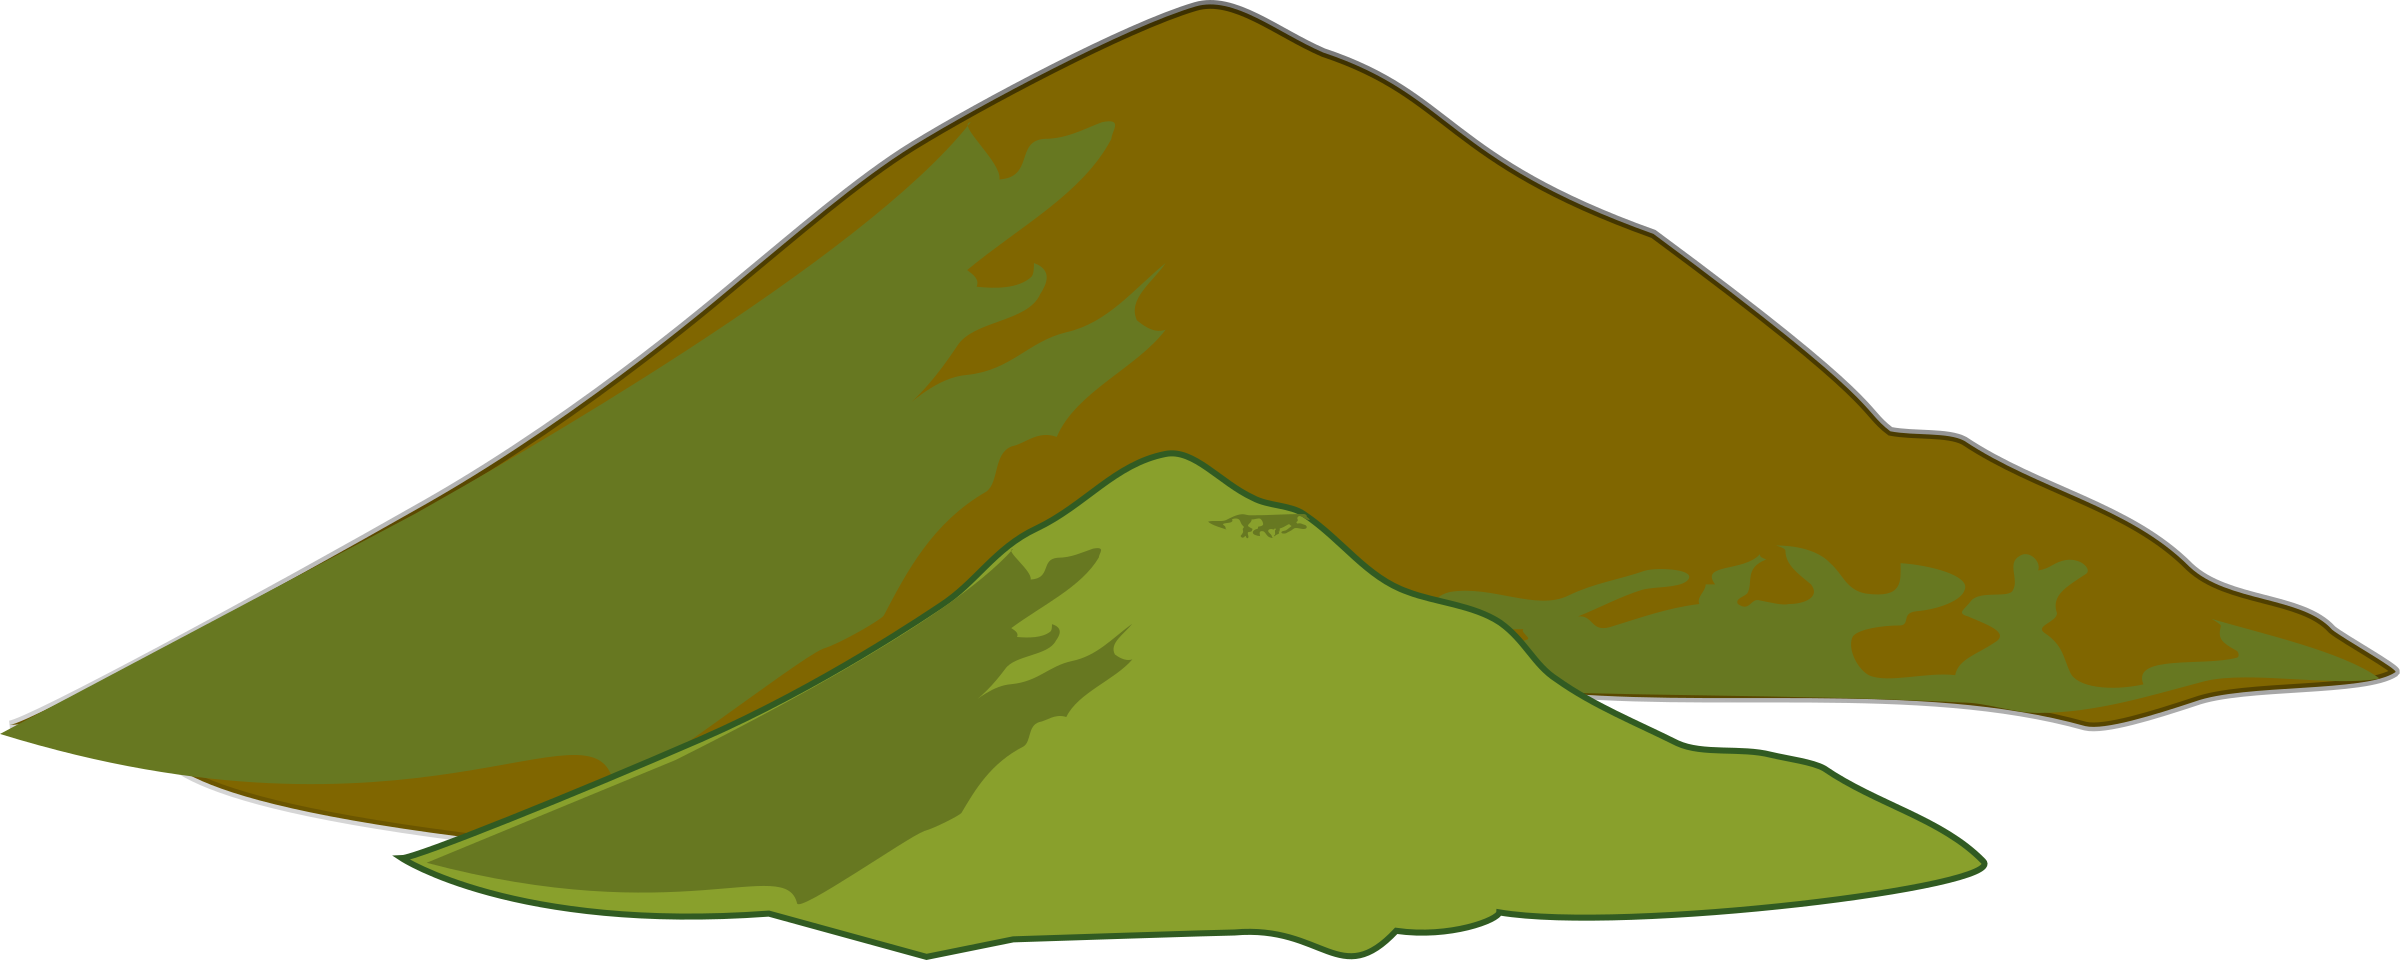 Mountains clipart free clip art images.